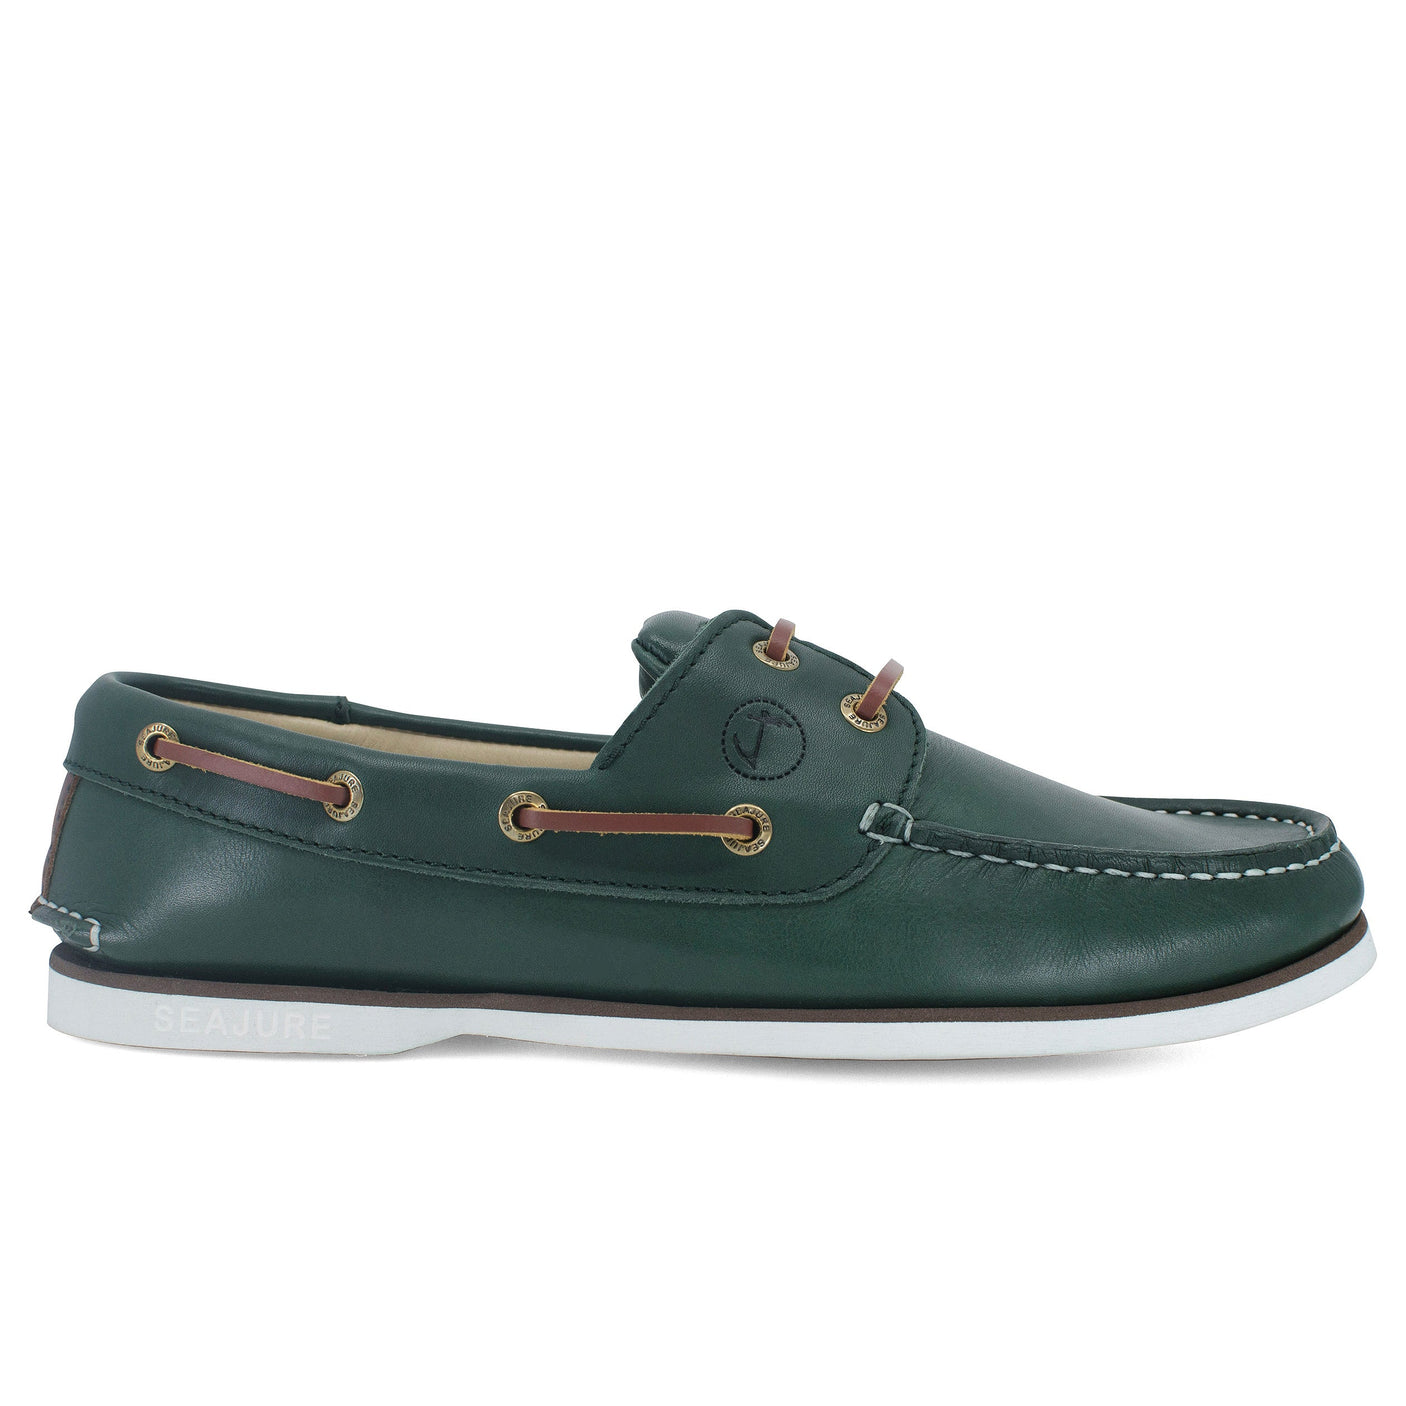 Nautical Elegance: Sailing in Style with Balmain Boat Shoes